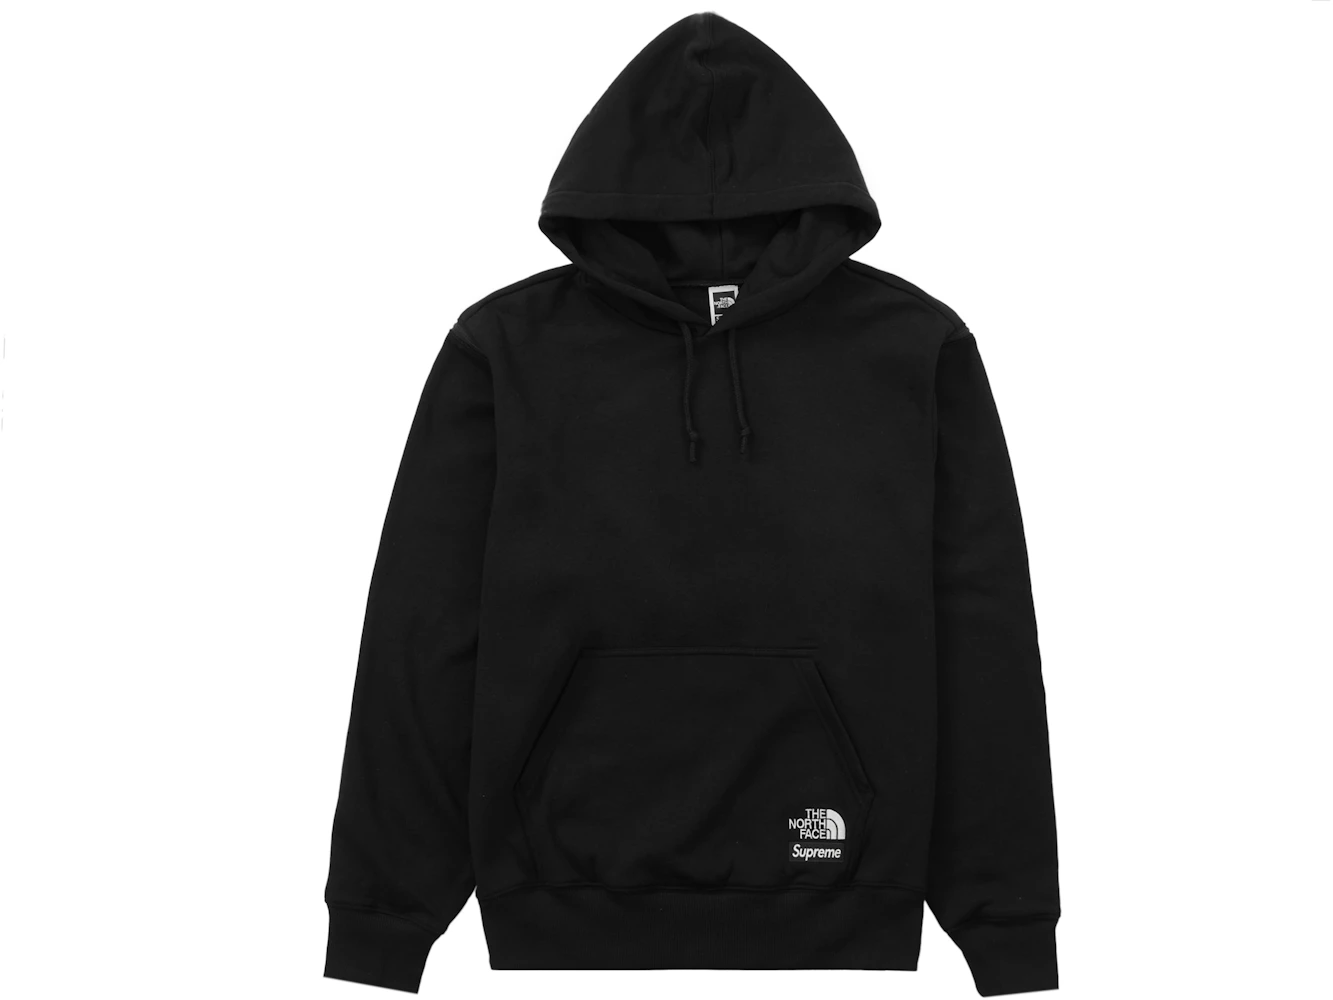 Supreme x The North Face Trekking Convertible Jacket: StockX Pick